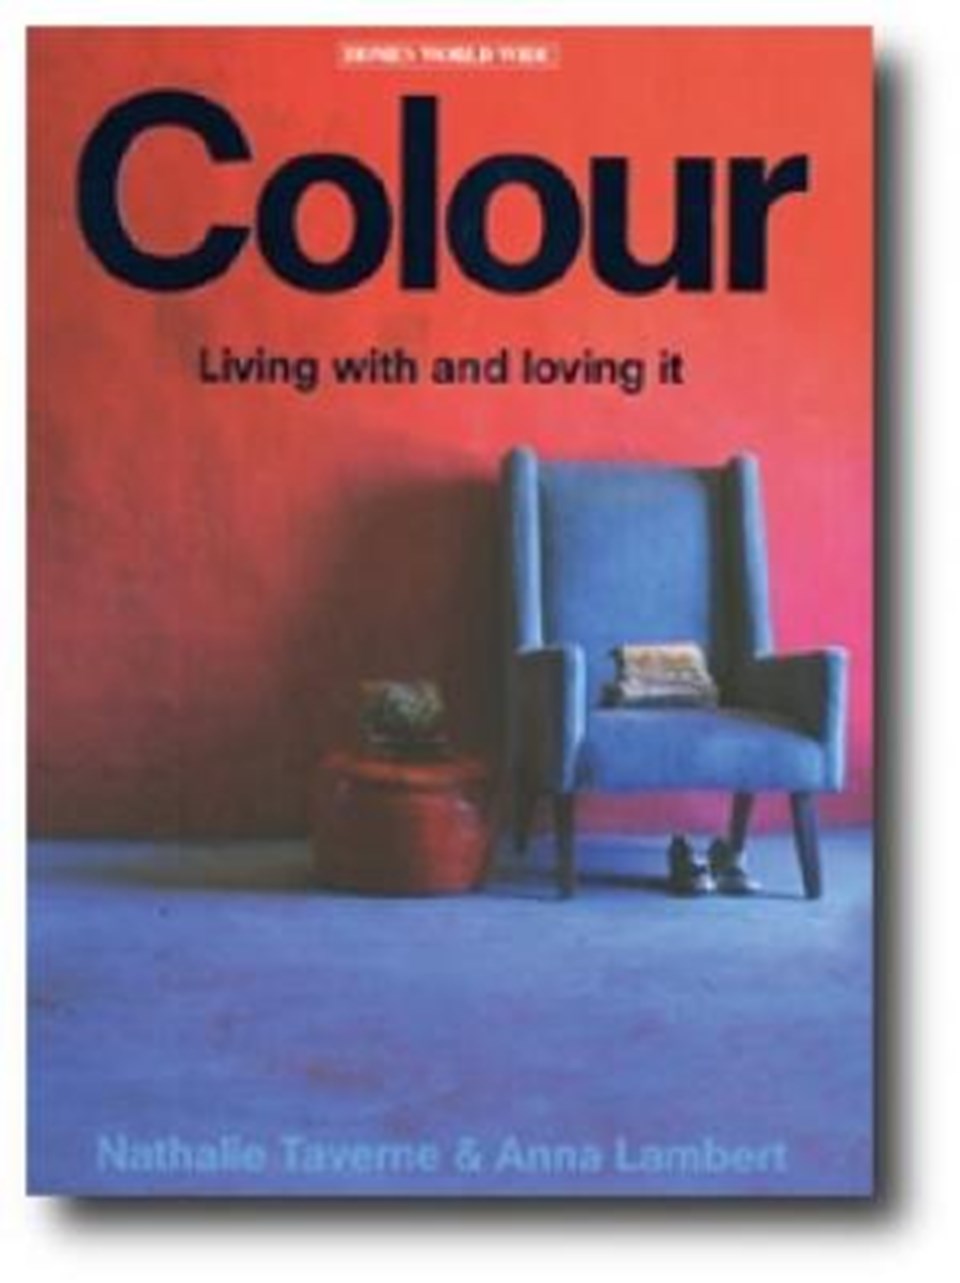 Colour - Living with and loving it